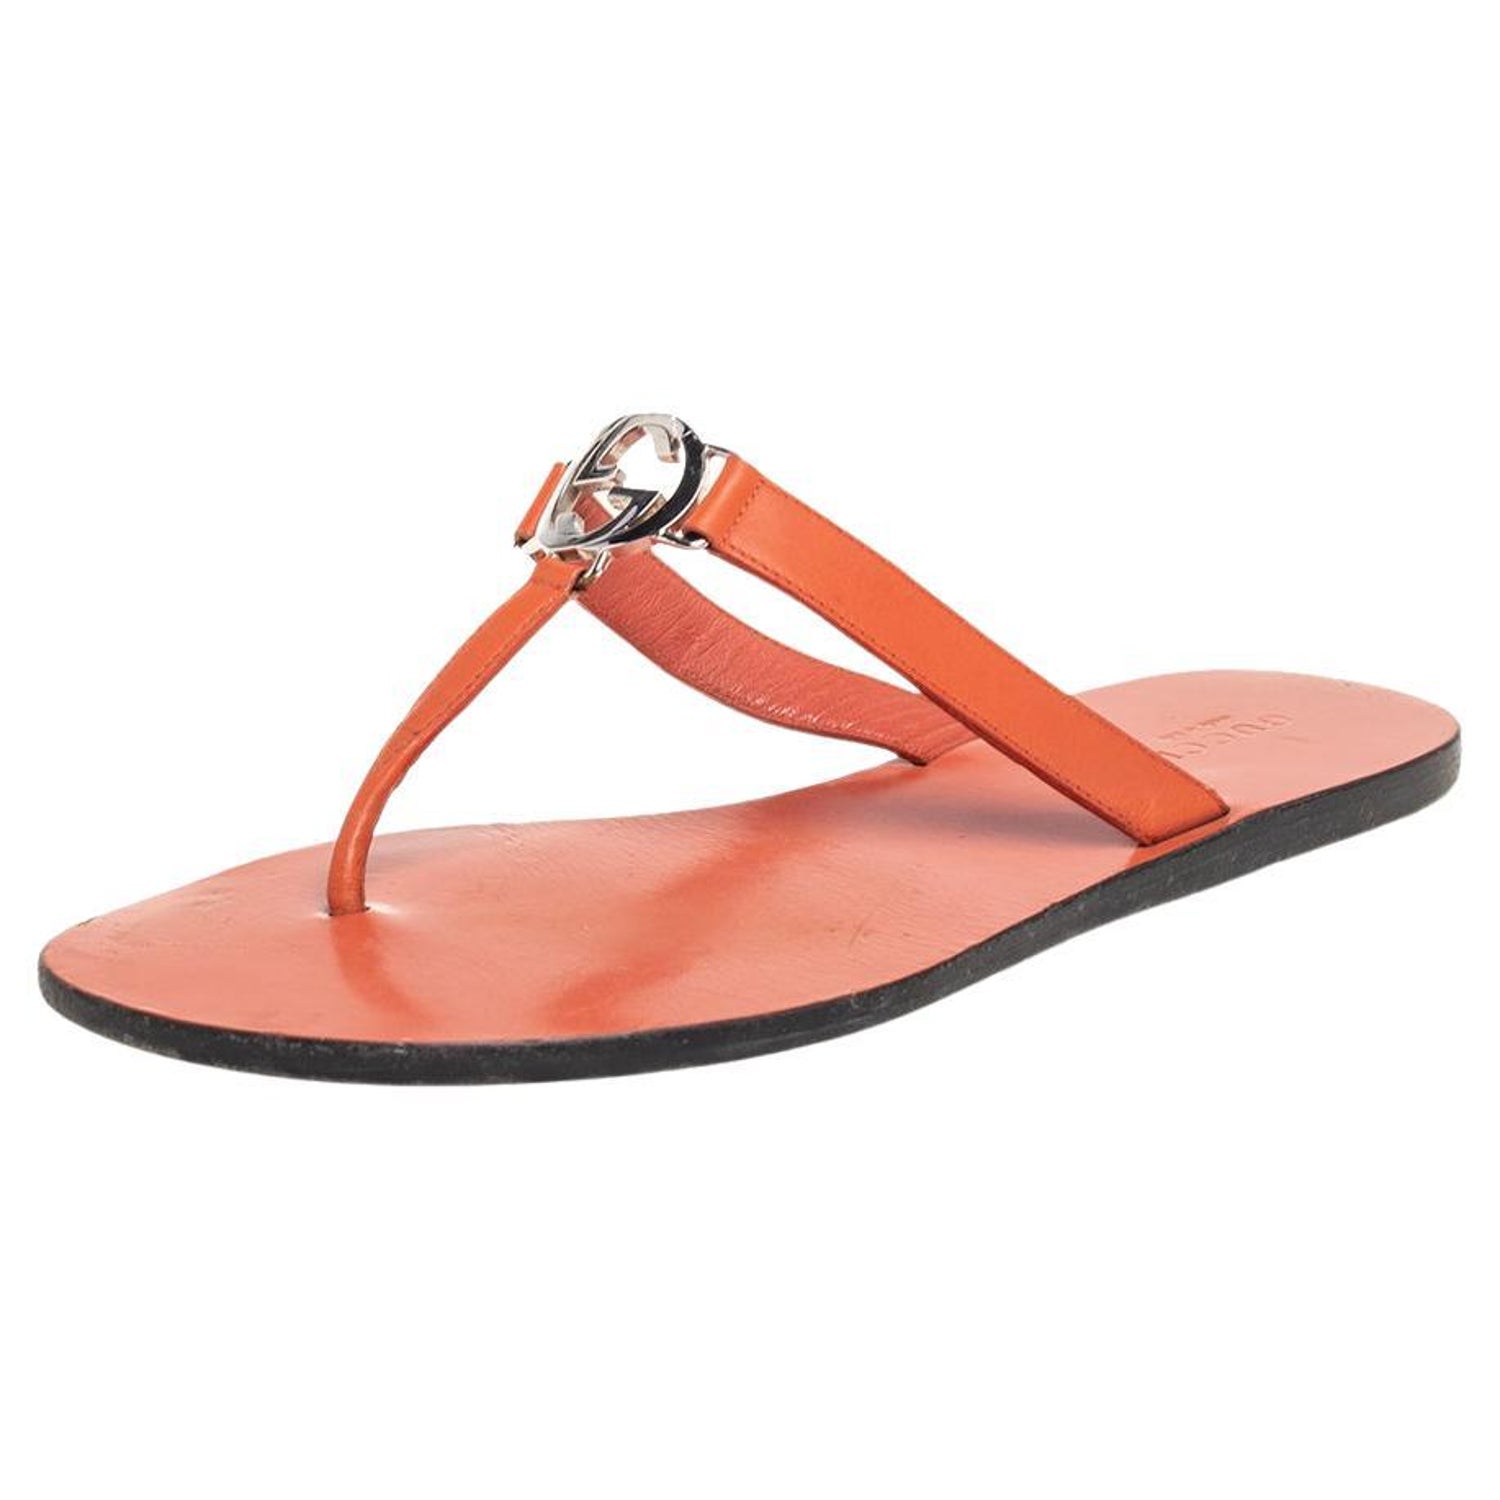 Gucci Thong Sandals - 9 For Sale on 1stDibs | gucci thong sandals sale,  gucci thong sandals cheap, gucci thong sandals women